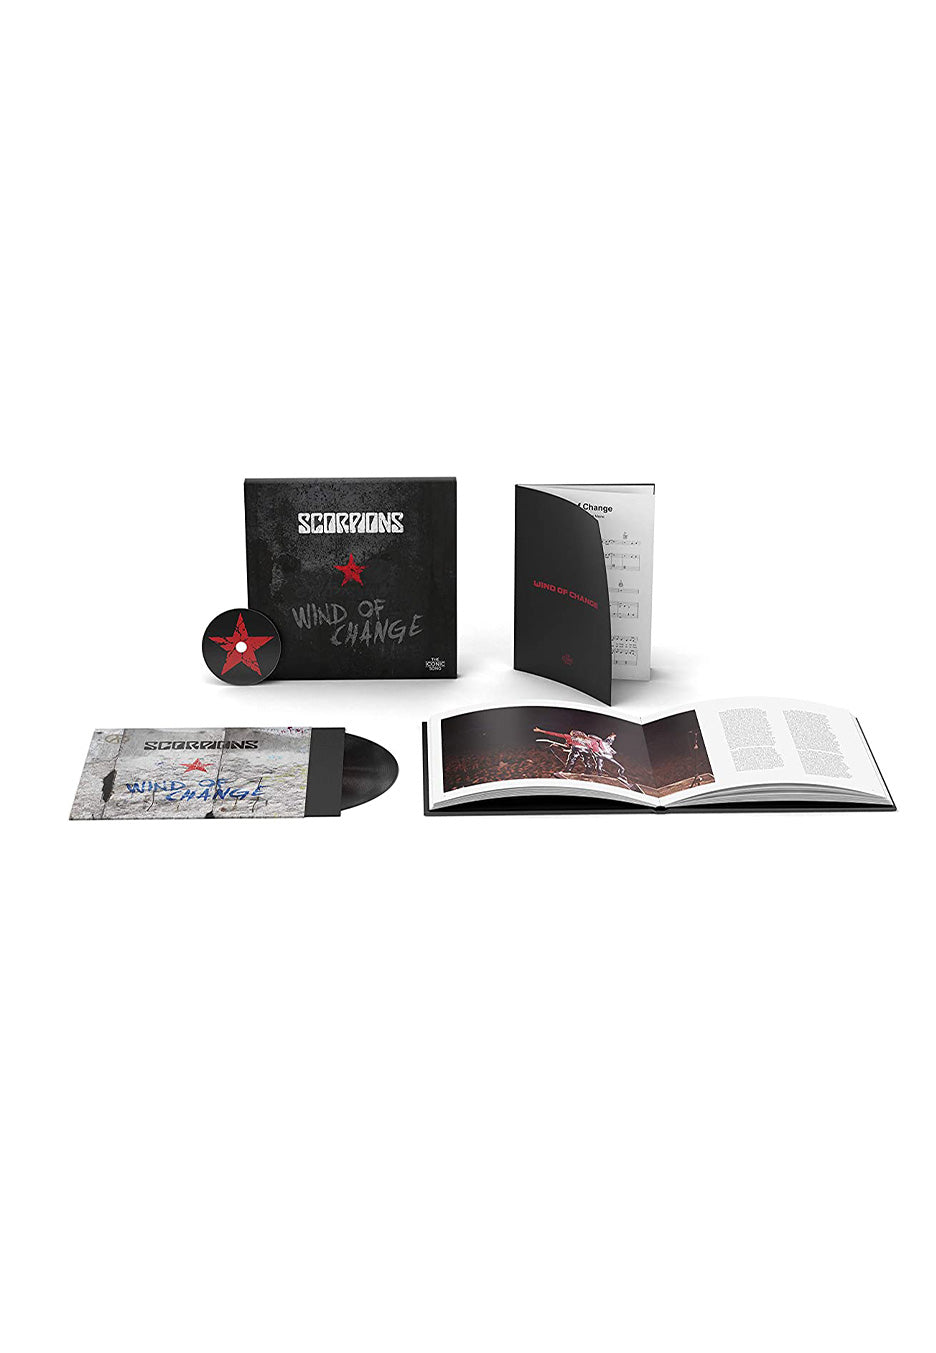 Scorpions - Wind Of Change: The Iconic Song - Vinly + CD Boxset 